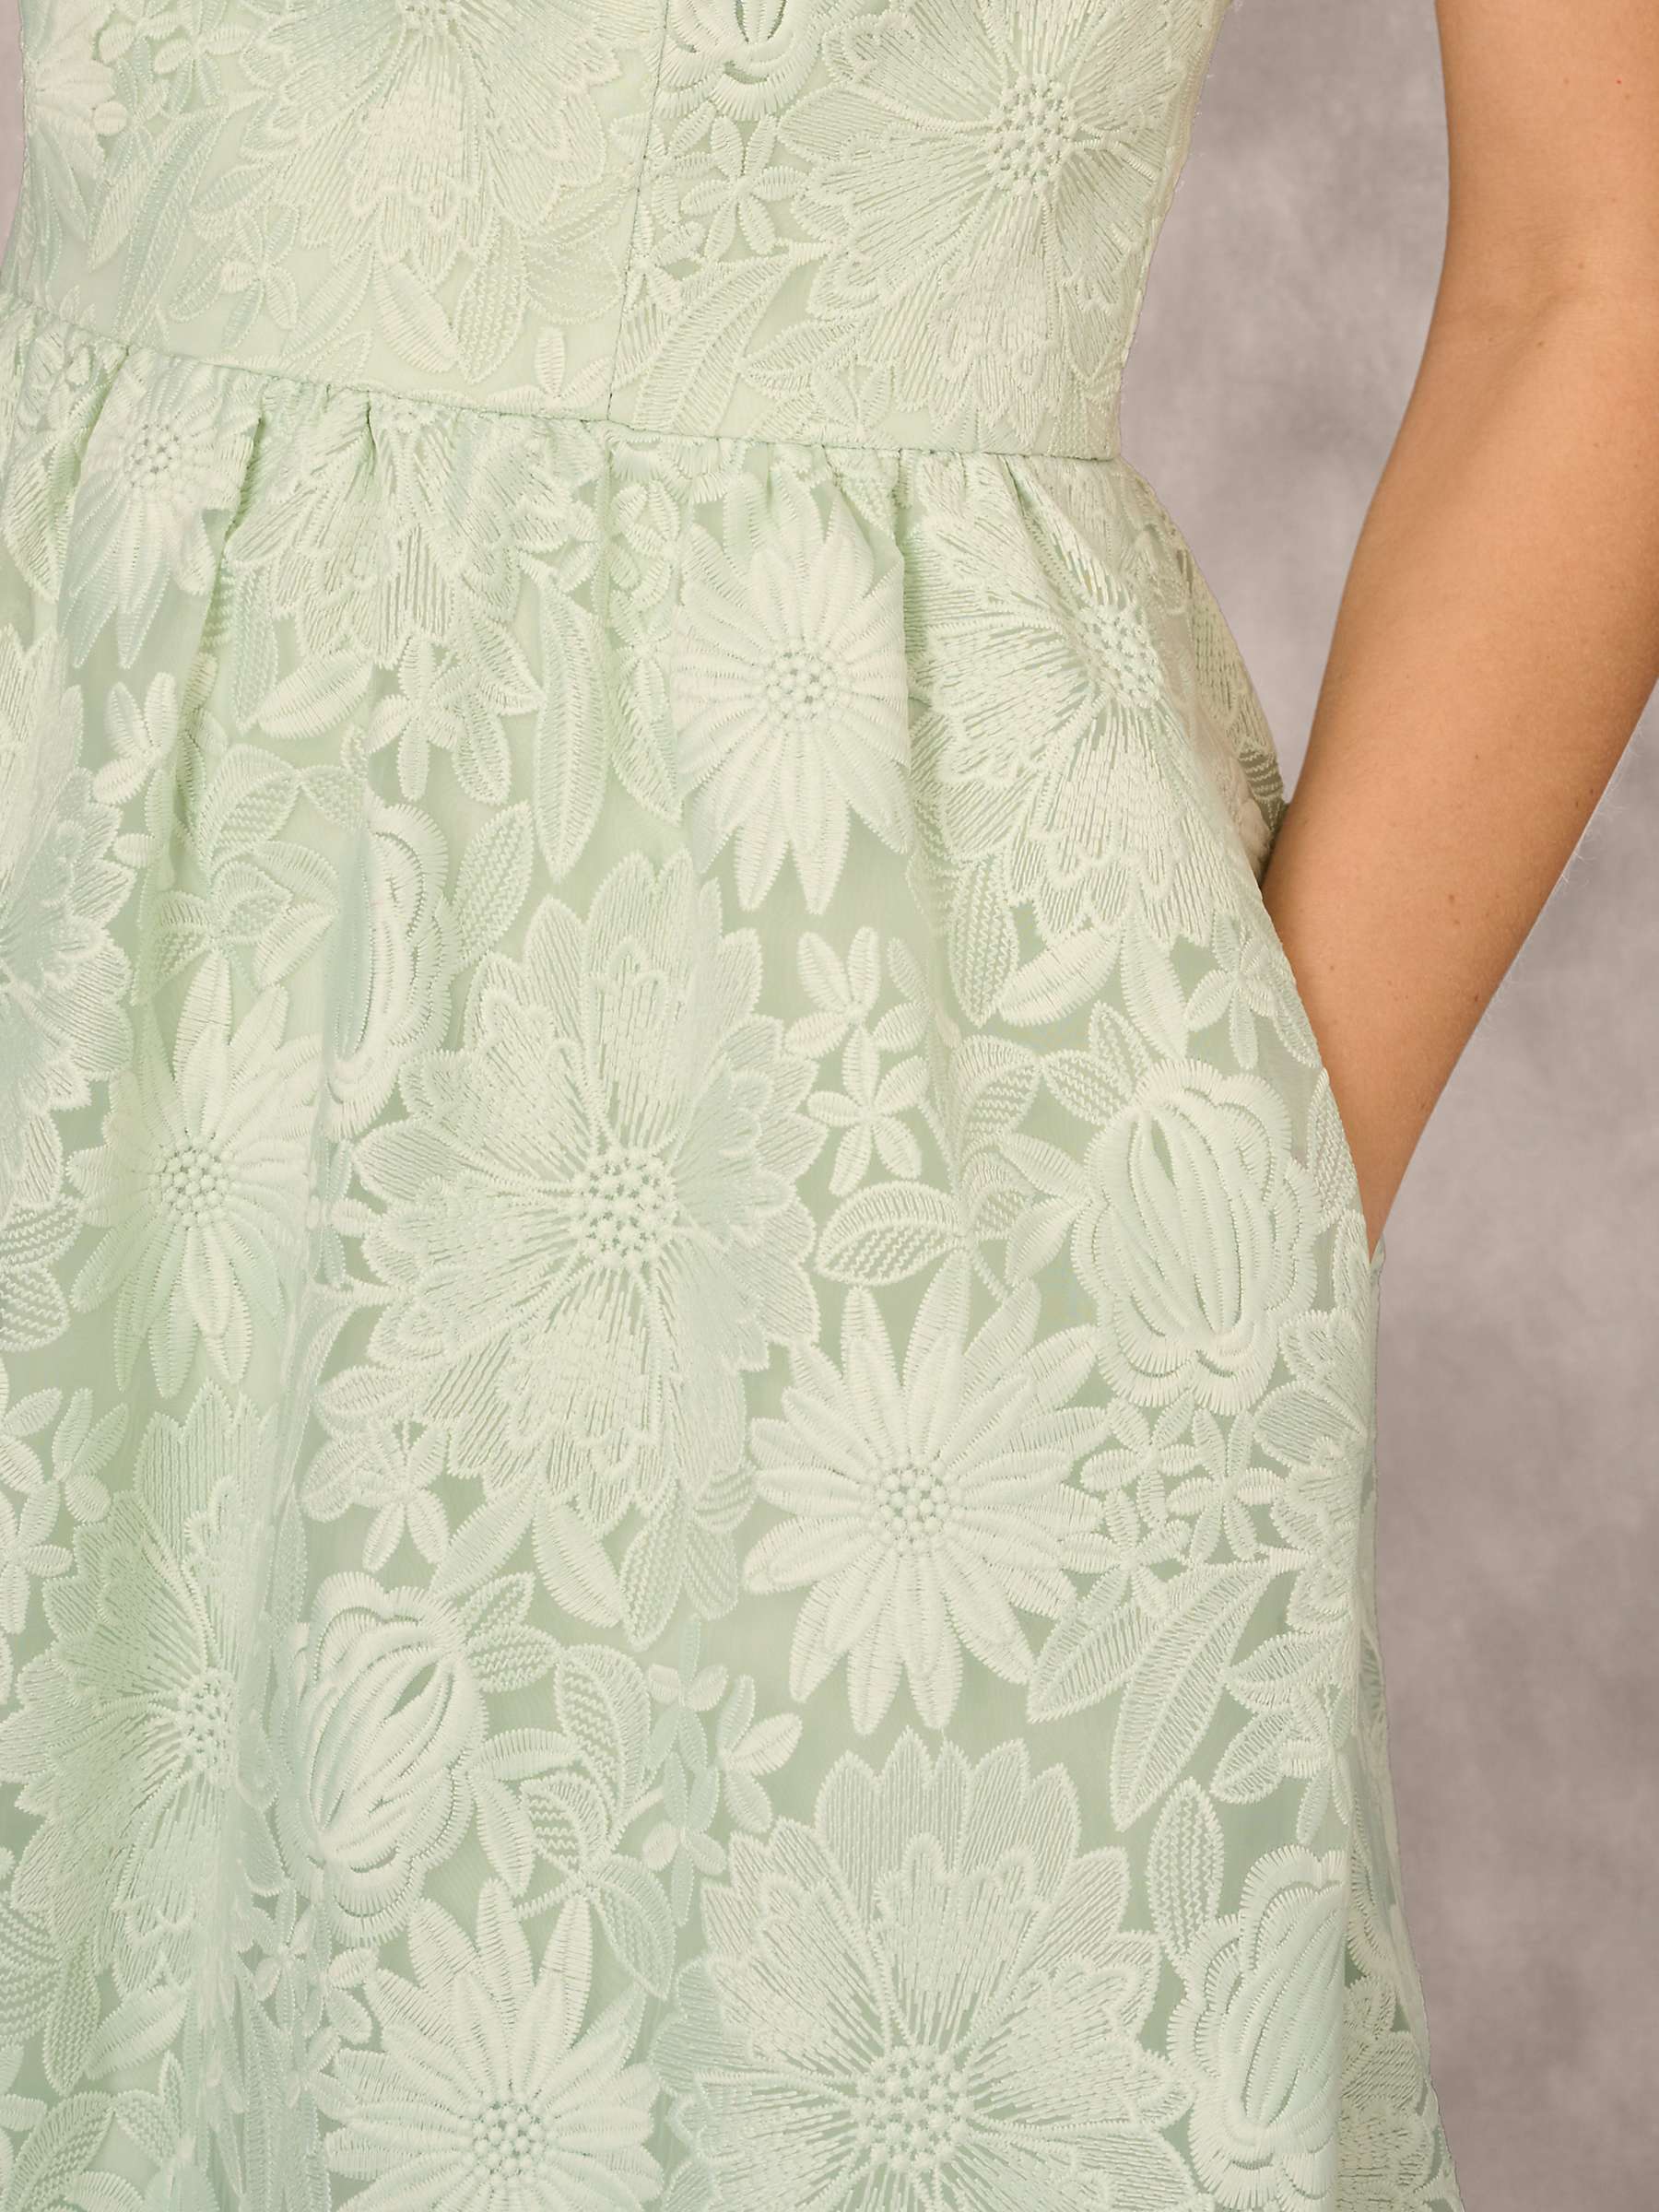 Buy Adrianna Papell Floral Embroidered Organza Midi Dress, Mint Online at johnlewis.com